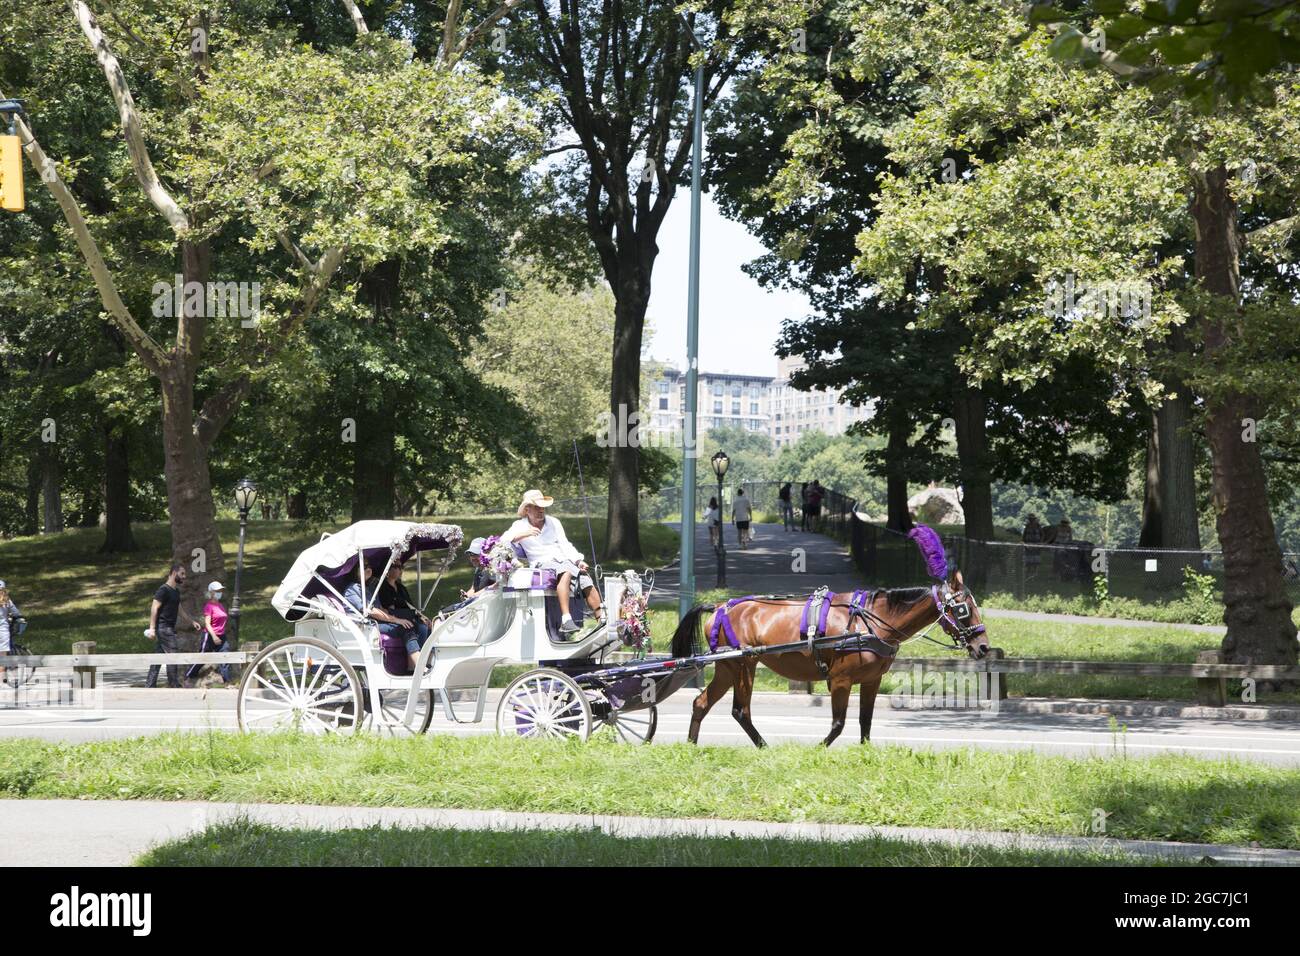 A leisurely horse and buggy ride  in Central Park is a popular attraction for many tourists in the Big Apple, New york City. Stock Photo